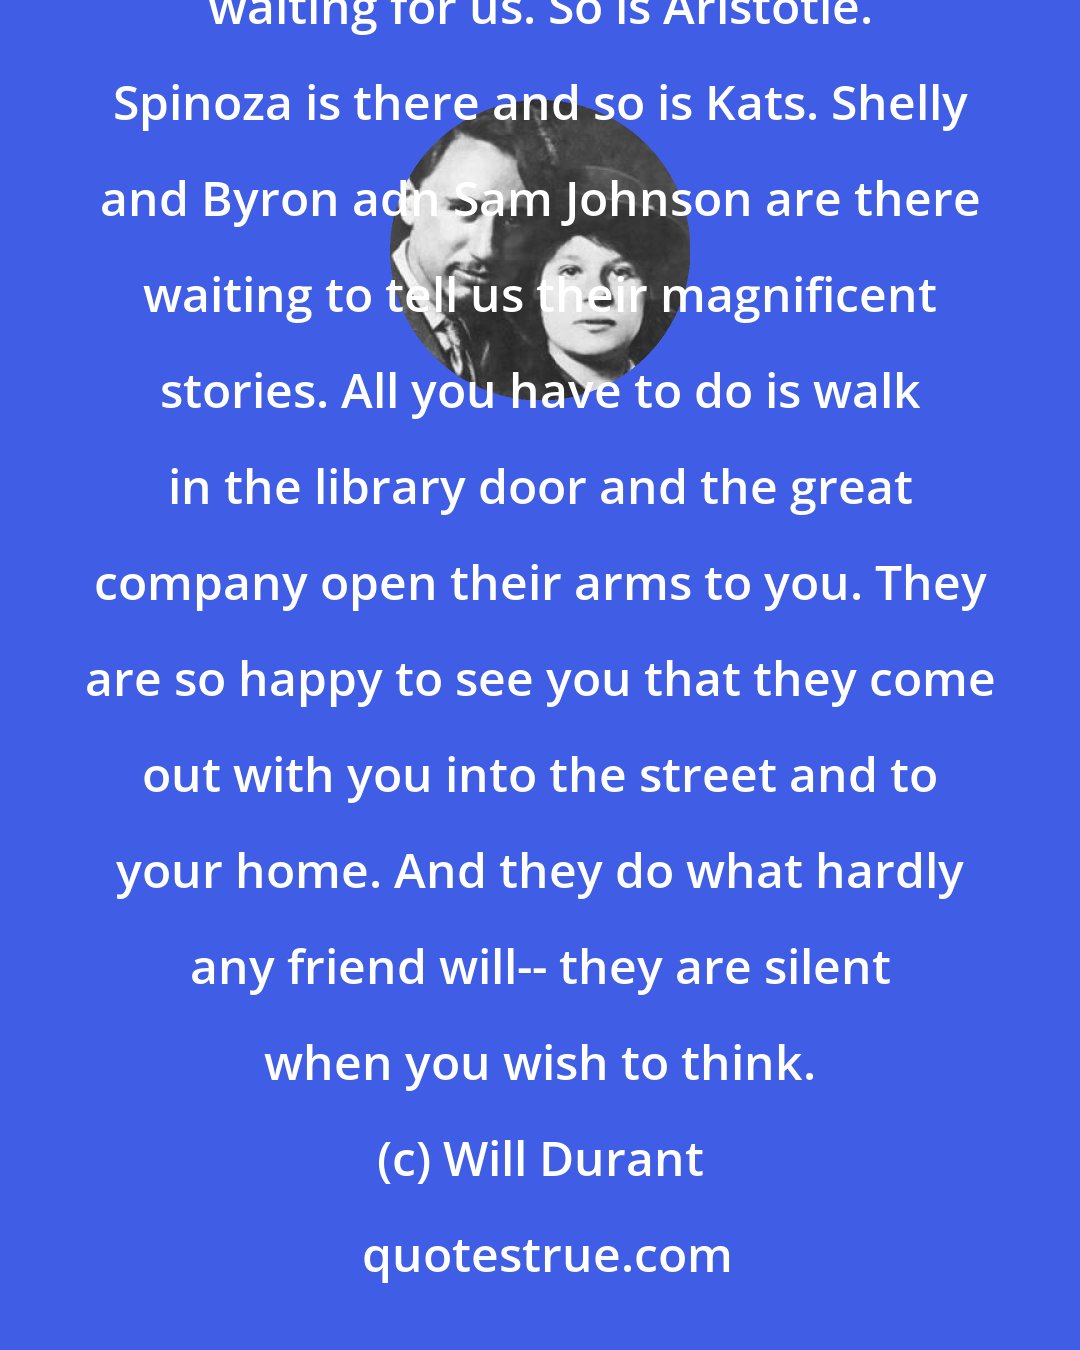 Will Durant: All that is good in our history is gathered in libraries. At this moment, Plato is down there at the library waiting for us. So is Aristotle. Spinoza is there and so is Kats. Shelly and Byron adn Sam Johnson are there waiting to tell us their magnificent stories. All you have to do is walk in the library door and the great company open their arms to you. They are so happy to see you that they come out with you into the street and to your home. And they do what hardly any friend will-- they are silent when you wish to think.